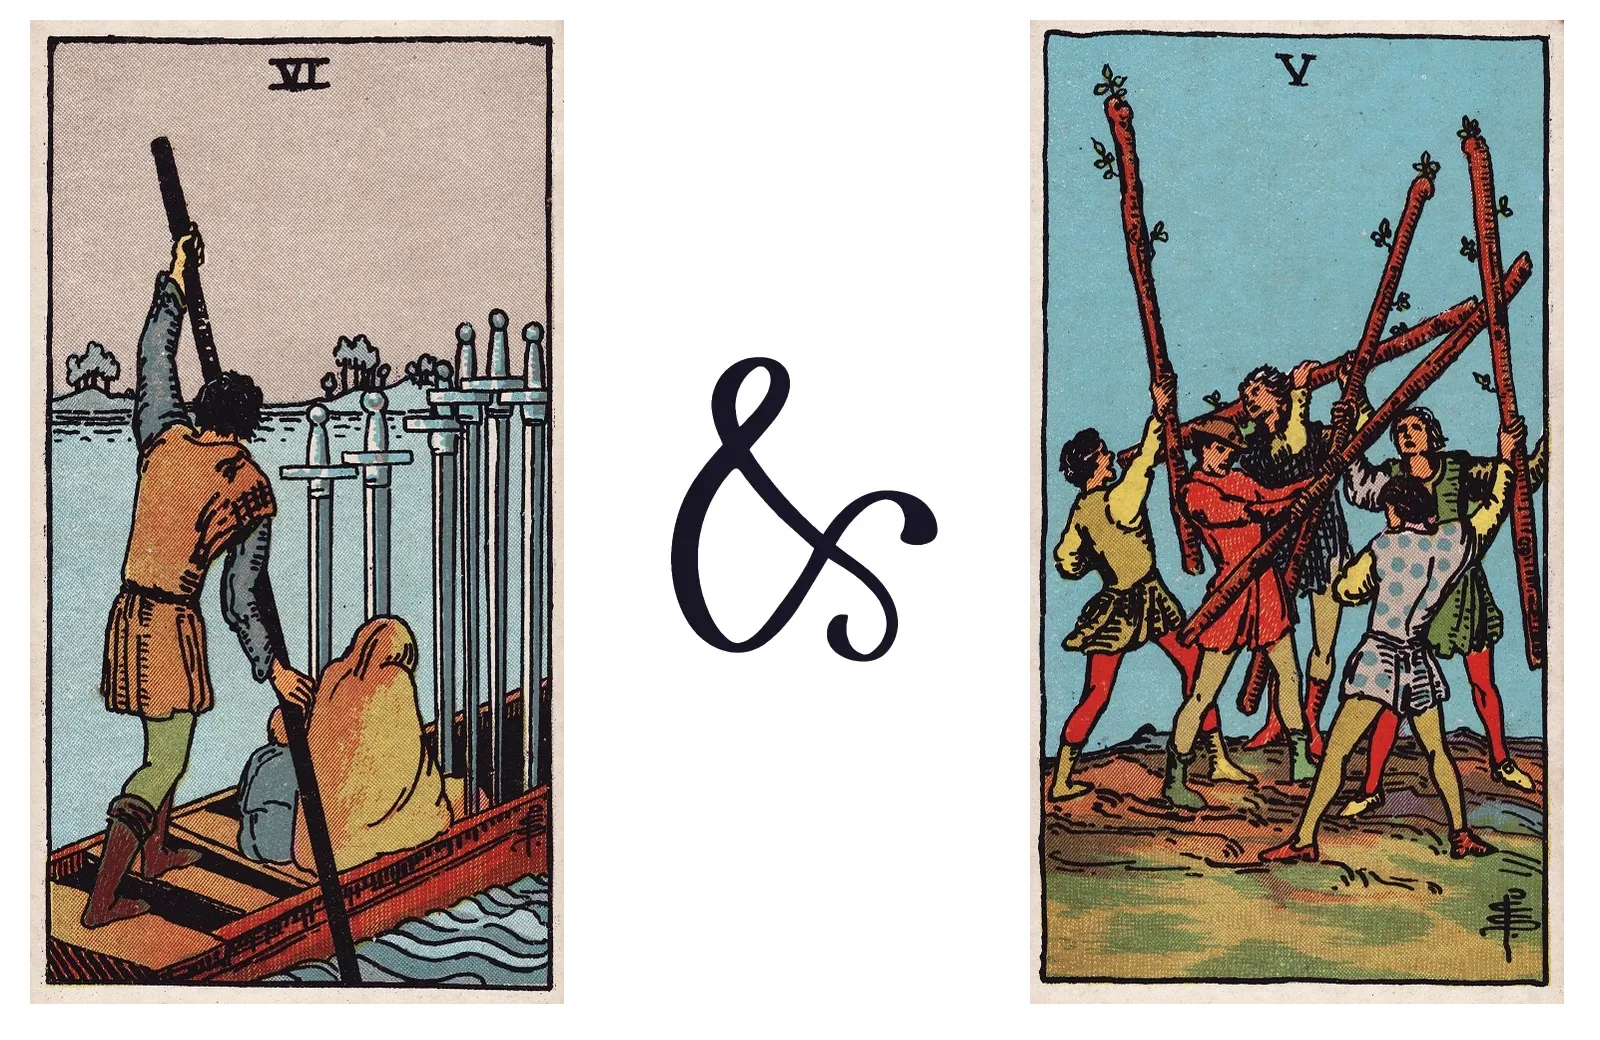 Six of Swords and Five of Wands